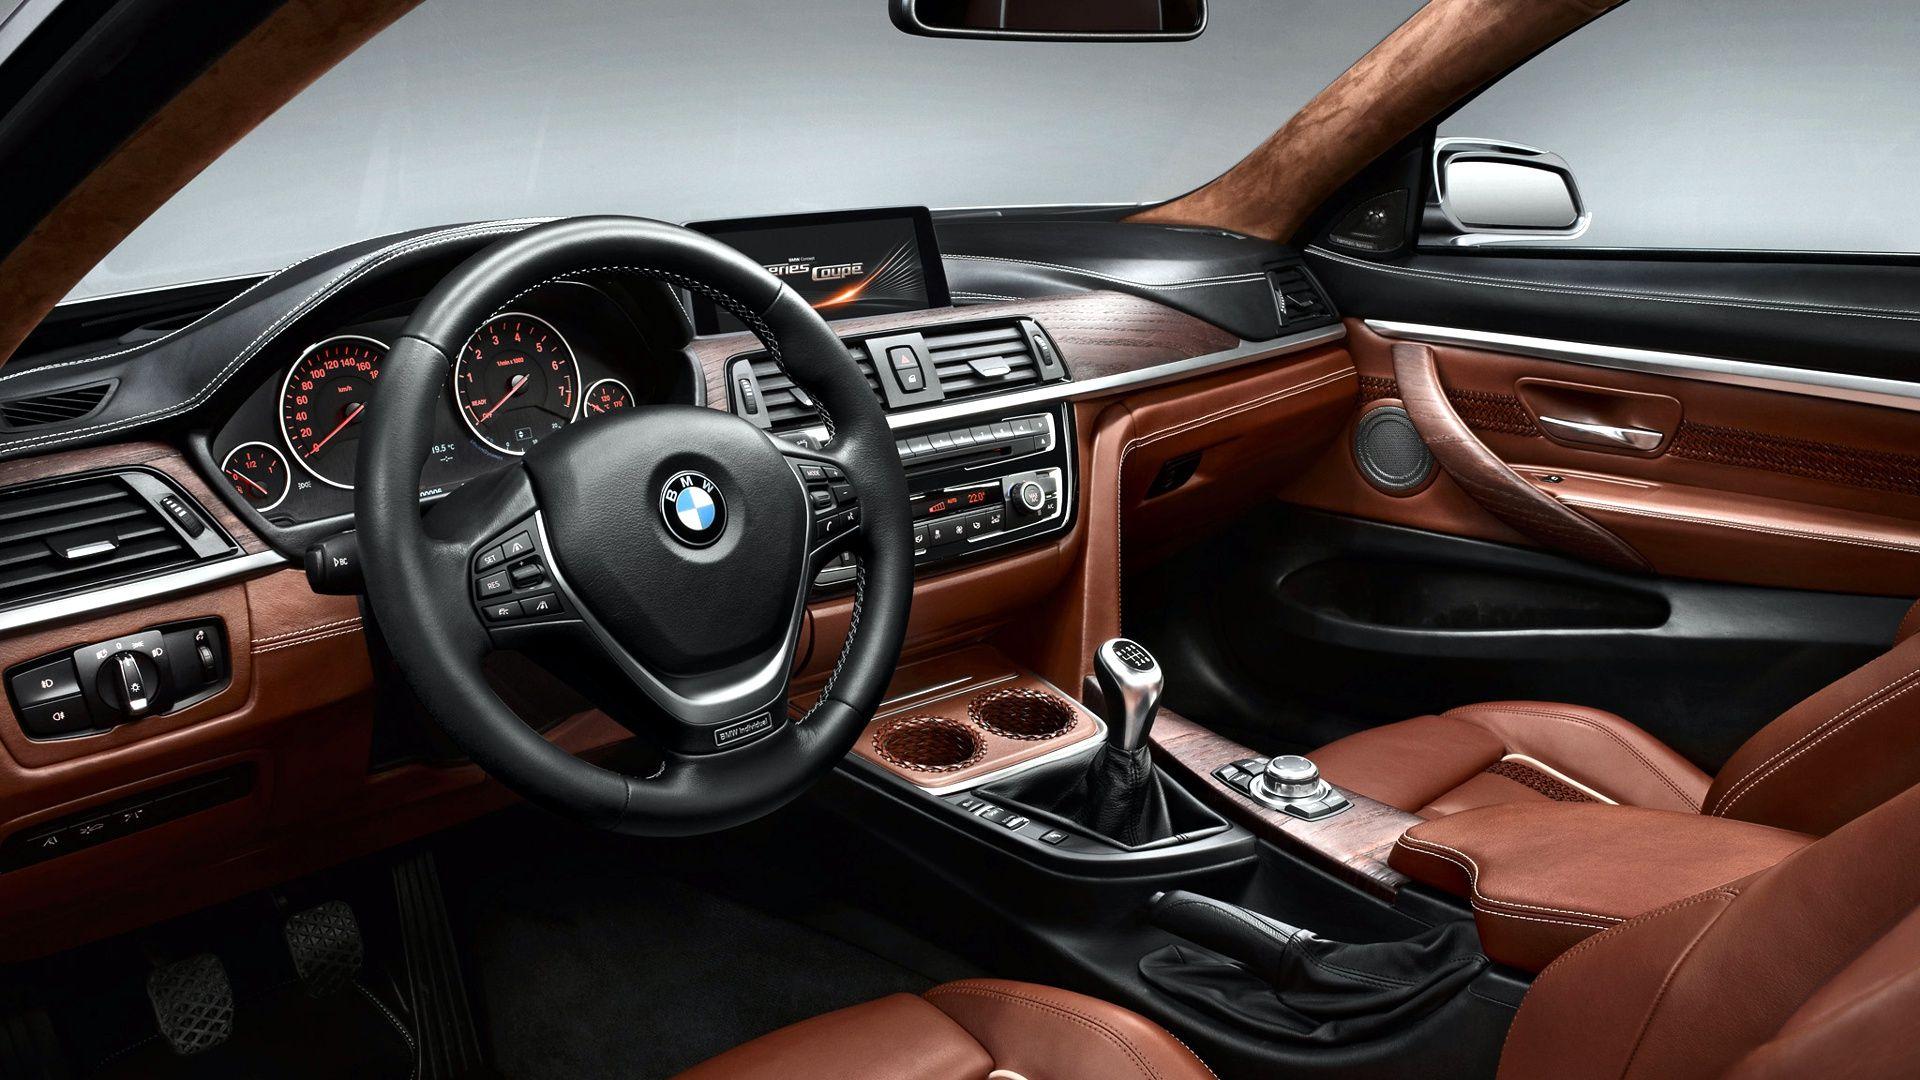 Simply HD Wallpaper for your desktop. Bmw cars wallpaper are free